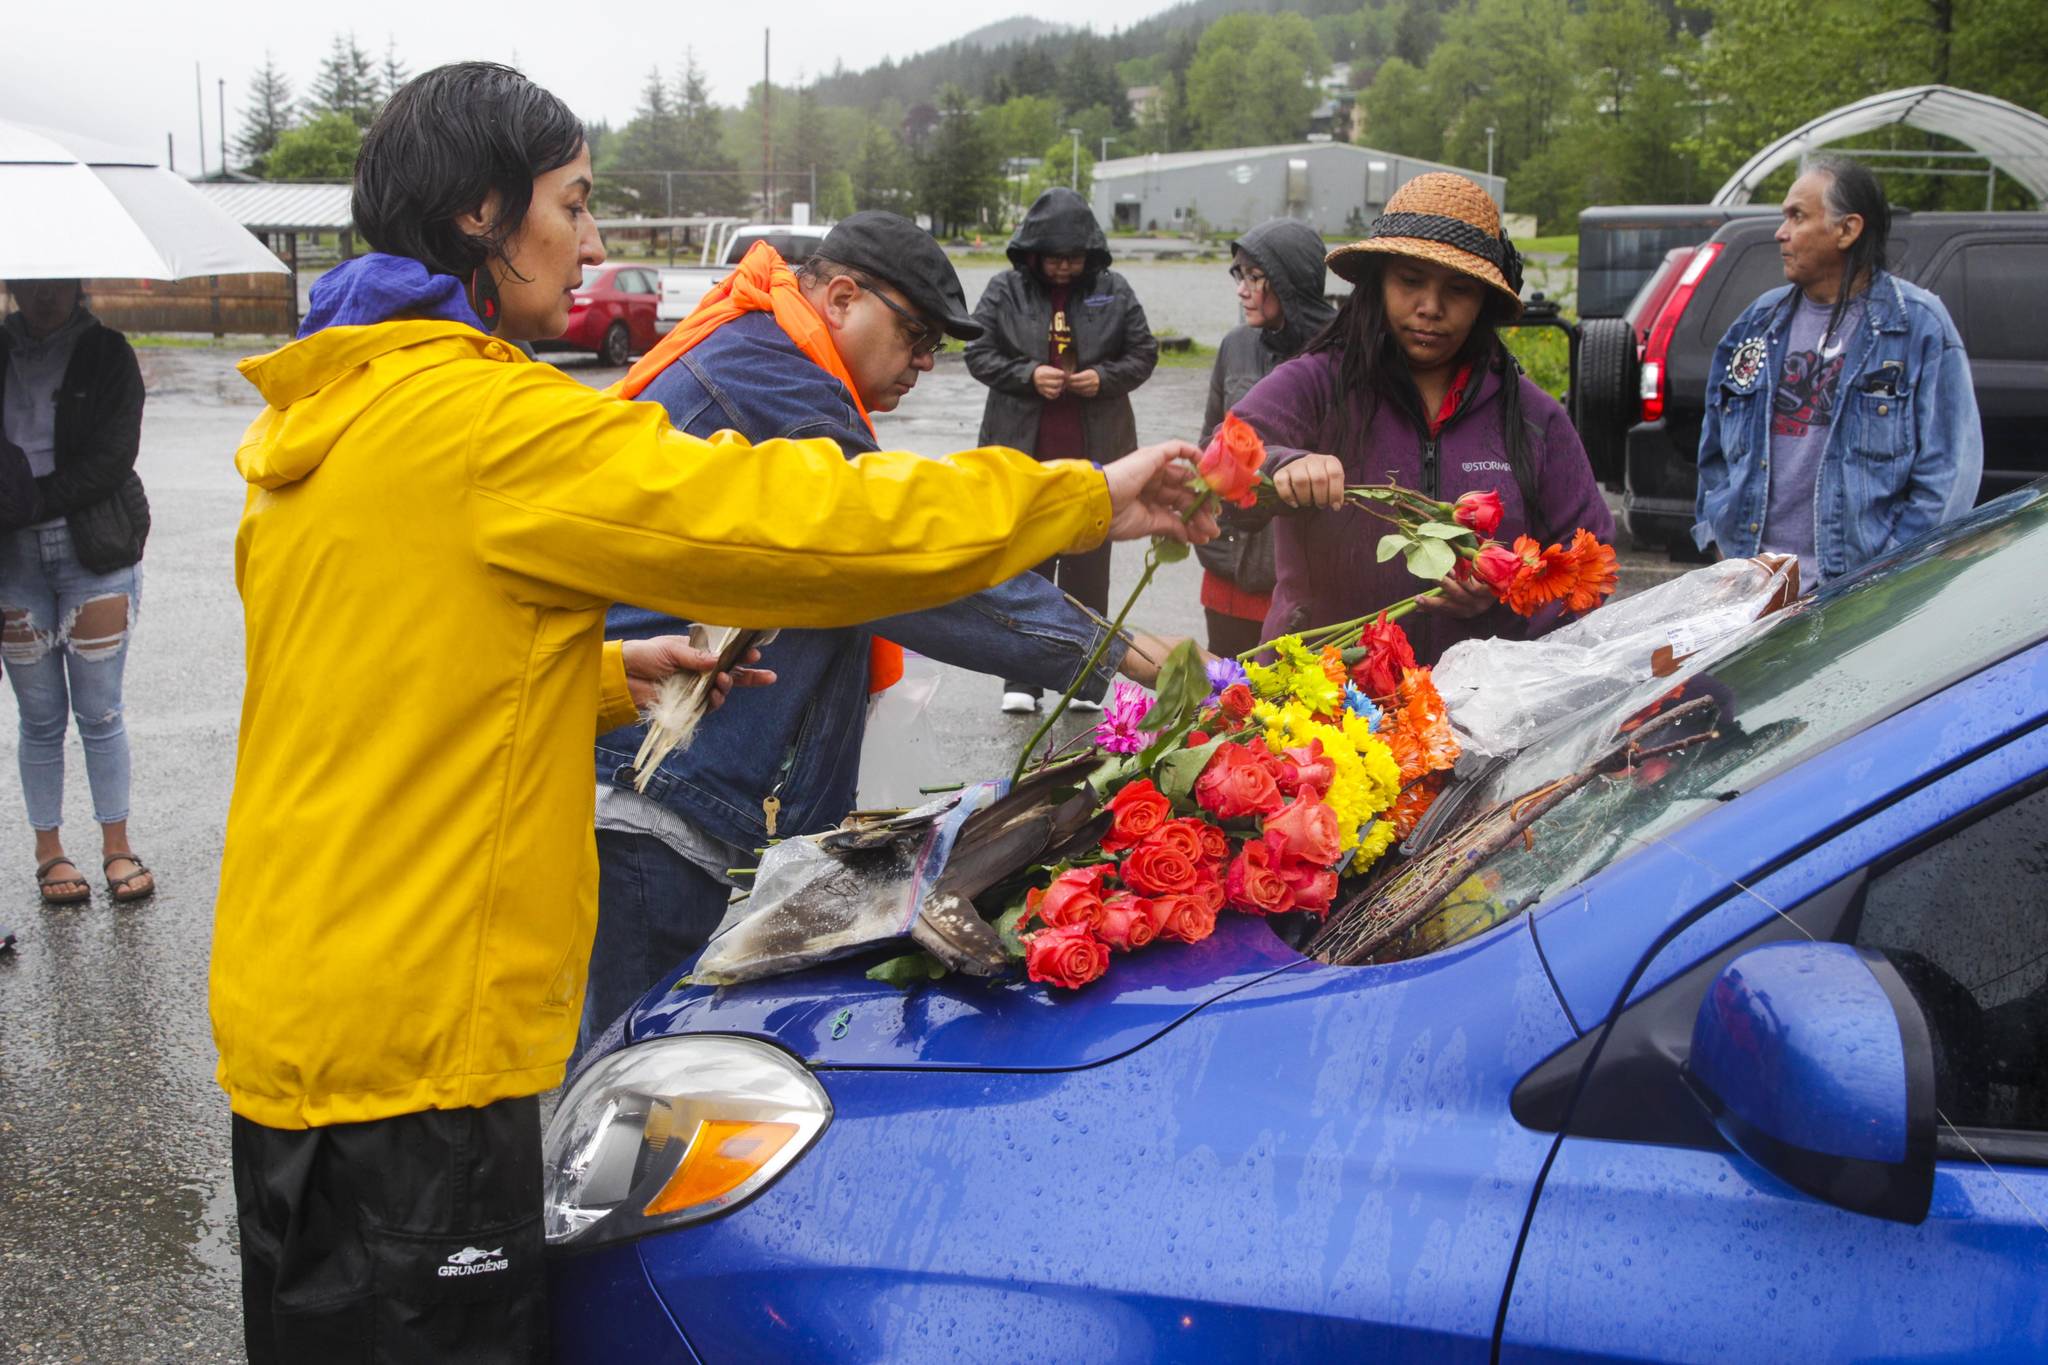 Michael S. Lockett / Juneau Empire
Juneau residents sing together outside the Juneau Montessori School, formerly the Mayflower School built by the Bureau of Indian Affairs, to honor the 215 dead Indigenous children found at a residential school in Canada, on May 31, 2021.